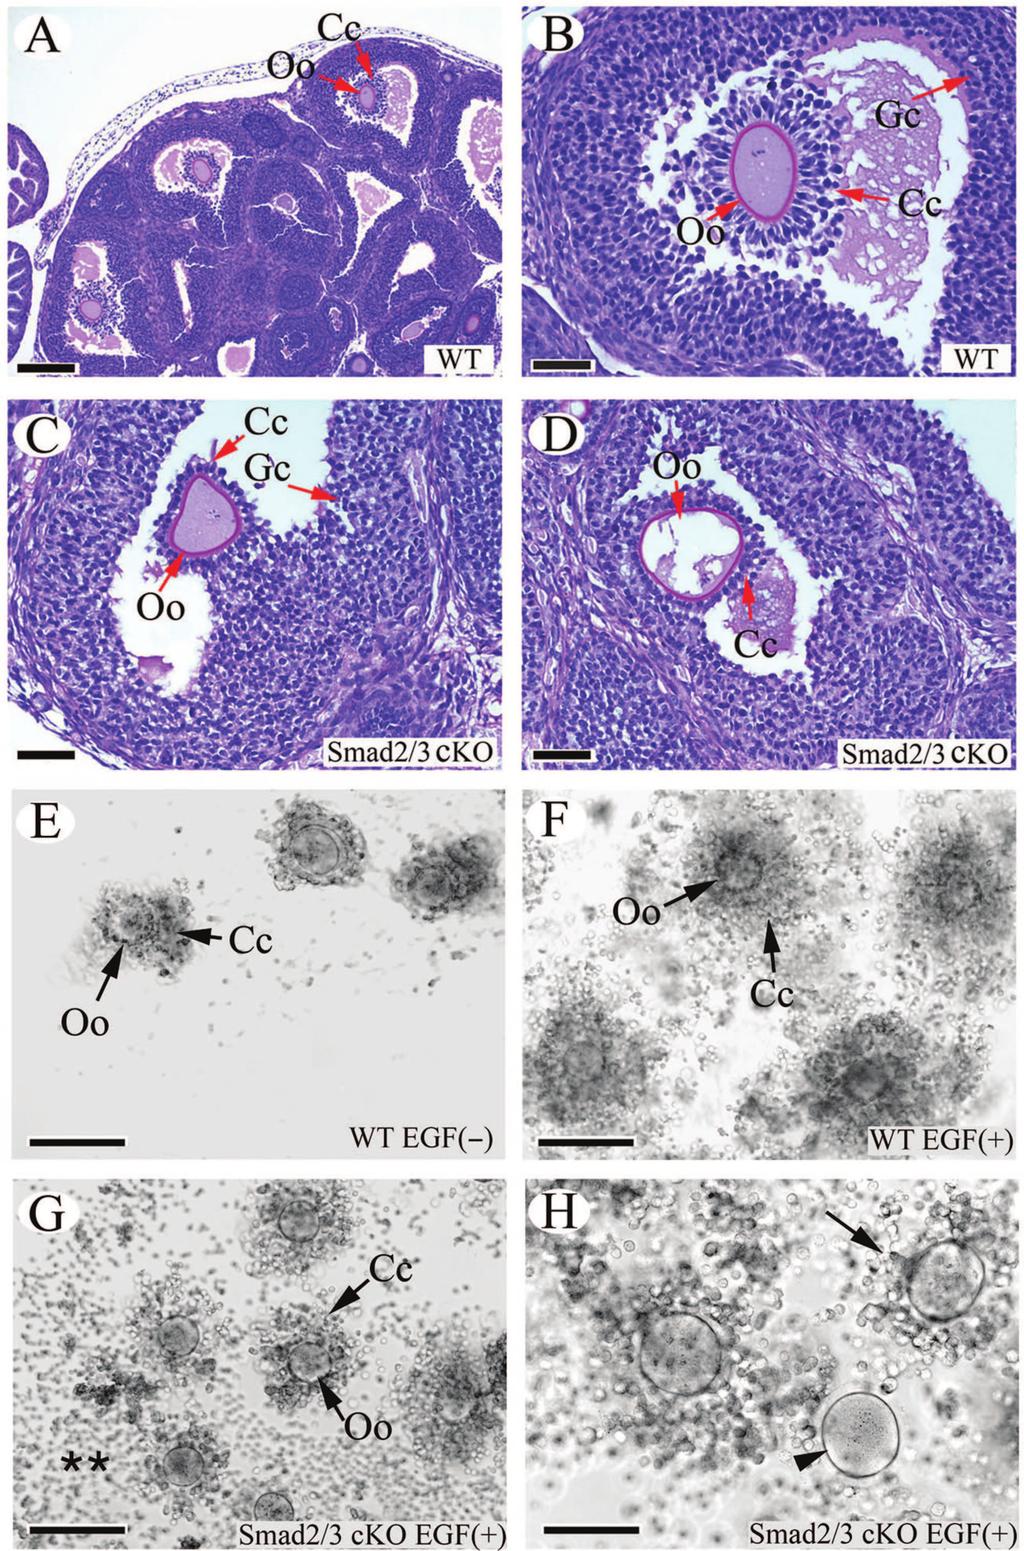 VOL. 28, 2008 REDUNDANCY OF SMAD2 AND SMAD3 IN THE OVARY 7007 FIG. 5.